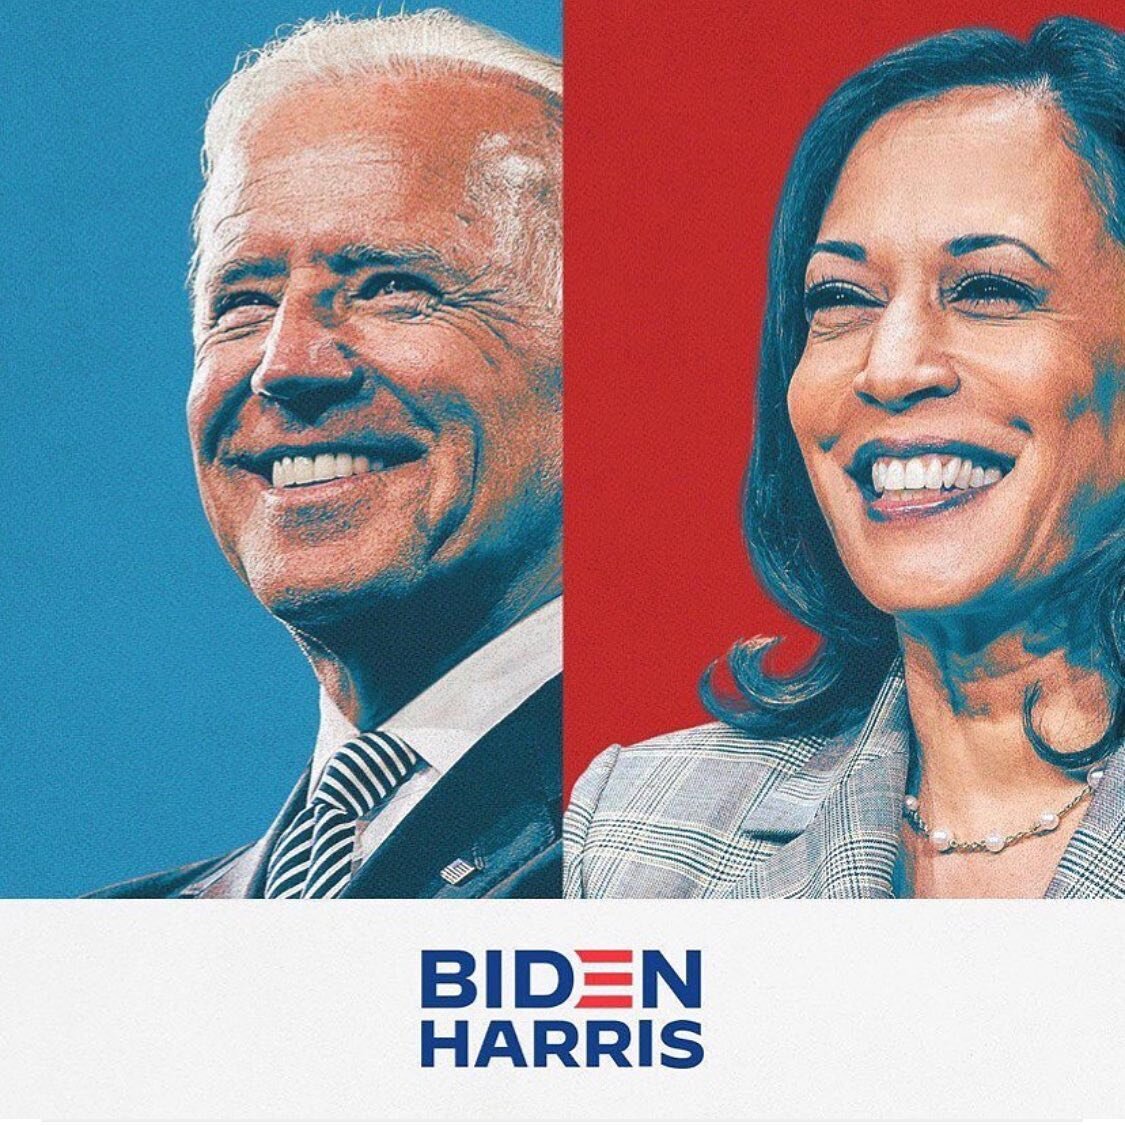 History has been made and I couldn&rsquo;t be happier. A huge weight has been lifted off my chest. Congratulations President @joebiden and THE FIRST FEMALE VP MADAM VICE PRESIDENT @kamalaharris.